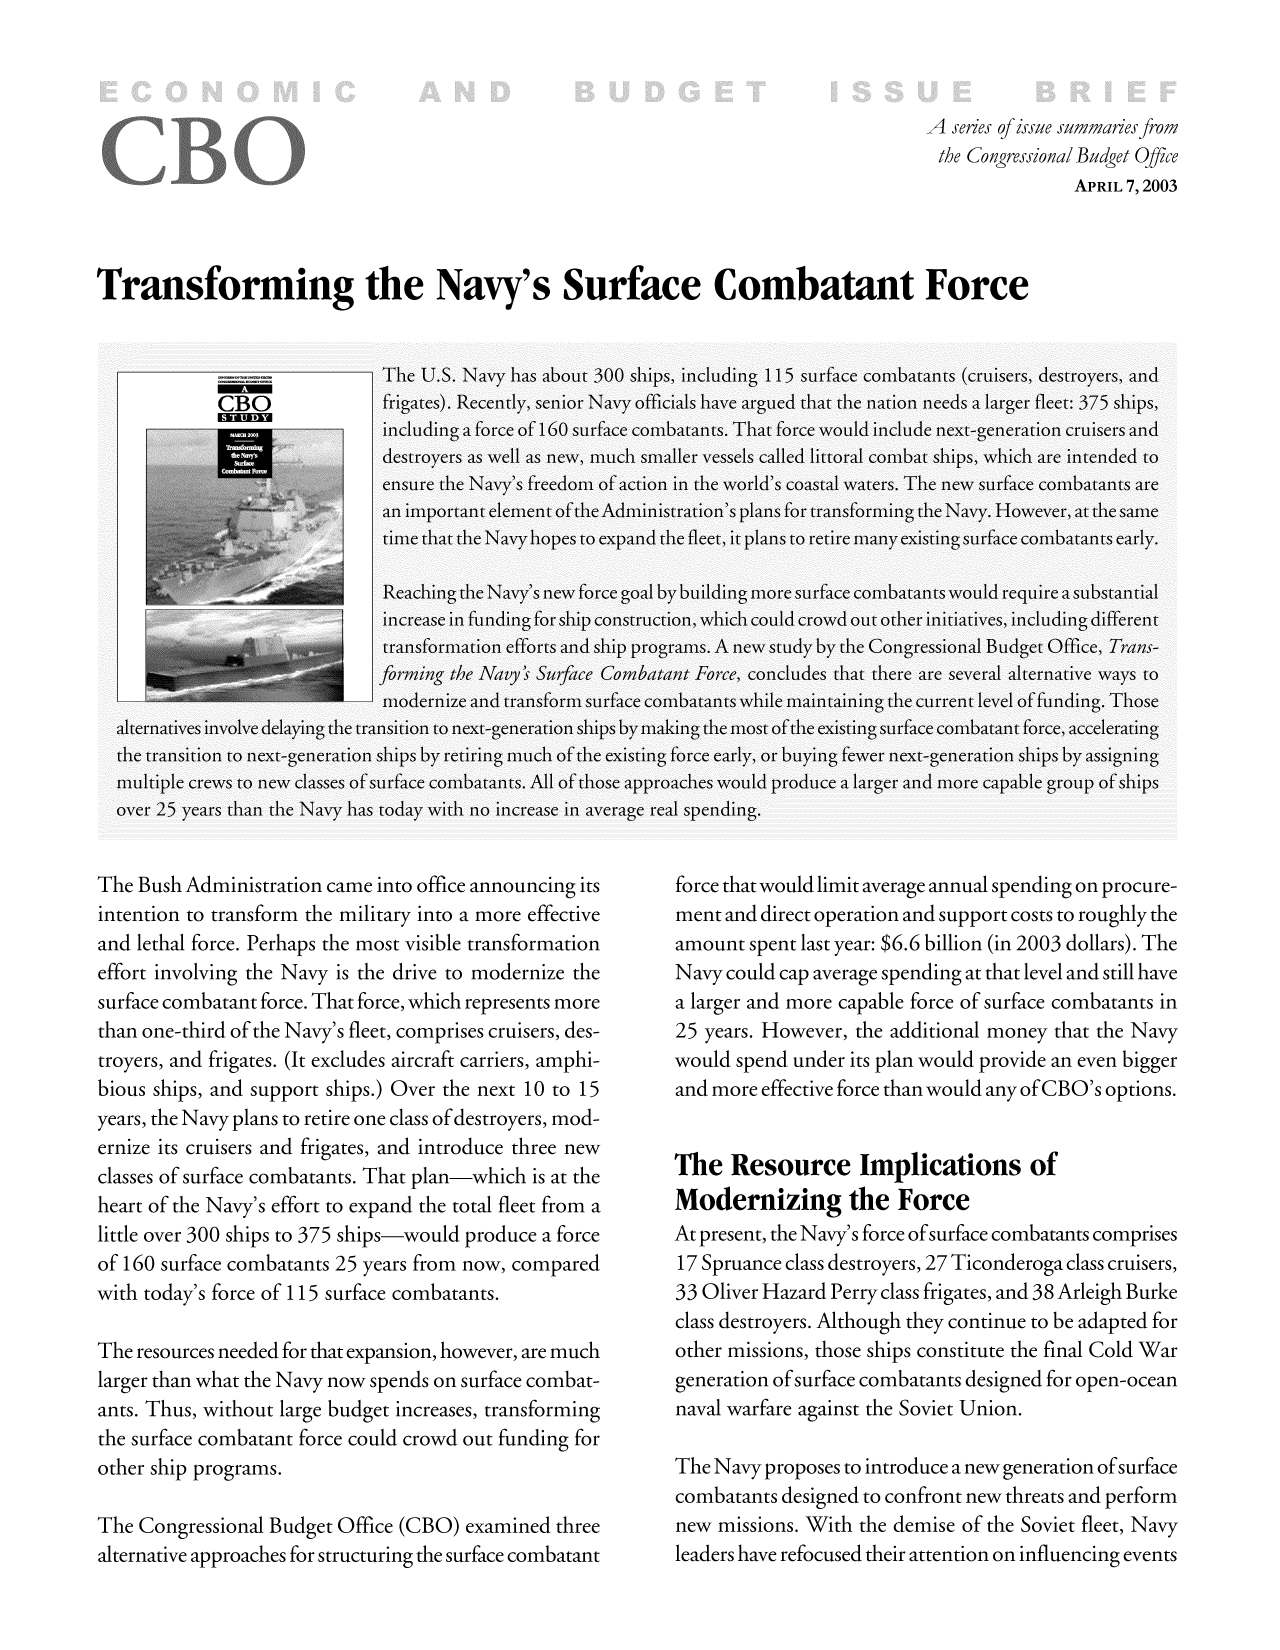 handle is hein.congrec/cbo9714 and id is 1 raw text is: A series of issue summal.es from
the Congressional Budget Office
APRIL 7, 2003
Transforming the Navy's Surface Combatant Force

The Bush Administration came into office announcing its
intention to transform the military into a more effective
and lethal force. Perhaps the most visible transformation
effort involving the Navy is the drive to modernize the
surface combatant force. That force, which represents more
than one-third of the Navy's fleet, comprises cruisers, des-
troyers, and frigates. (It excludes aircraft carriers, amphi-
bious ships, and support ships.) Over the next 10 to 15
years, the Navy plans to retire one class of destroyers, mod-
ernize its cruisers and frigates, and introduce three new
classes of surface combatants. That plan-which is at the
heart of the Navy's effort to expand the total fleet from a
little over 300 ships to 375 ships-would produce a force
of 160 surface combatants 25 years from now, compared
with today's force of 115 surface combatants.
The resources needed for that expansion, however, are much
larger than what the Navy now spends on surface combat-
ants. Thus, without large budget increases, transforming
the surface combatant force could crowd out funding for
other ship programs.
The Congressional Budget Office (CBO) examined three
alternative approaches for structuring the surface combatant

force that would limit average annual spending on procure-
ment and direct operation and support costs to roughly the
amount spent last year: $6.6 billion (in 2003 dollars). The
Navy could cap average spending at that level and still have
a larger and more capable force of surface combatants in
25 years. However, the additional money that the Navy
would spend under its plan would provide an even bigger
and more effective force than would any ofCBO's options.
The Resource Implications of
Modernizing the Force
At present, the Navy's force of surface combatants comprises
17 Spruance class destroyers, 27 Ticonderoga class cruisers,
33 Oliver Hazard Perry class frigates, and 38 Arleigh Burke
class destroyers. Although they continue to be adapted for
other missions, those ships constitute the final Cold War
generation of surface combatants designed for open-ocean
naval warfare against the Soviet Union.
The Navy proposes to introduce a new generation ofsurface
combatants designed to confront new threats and perform
new missions. With the demise of the Soviet fleet, Navy
leaders have refocused their attention on influencing events


